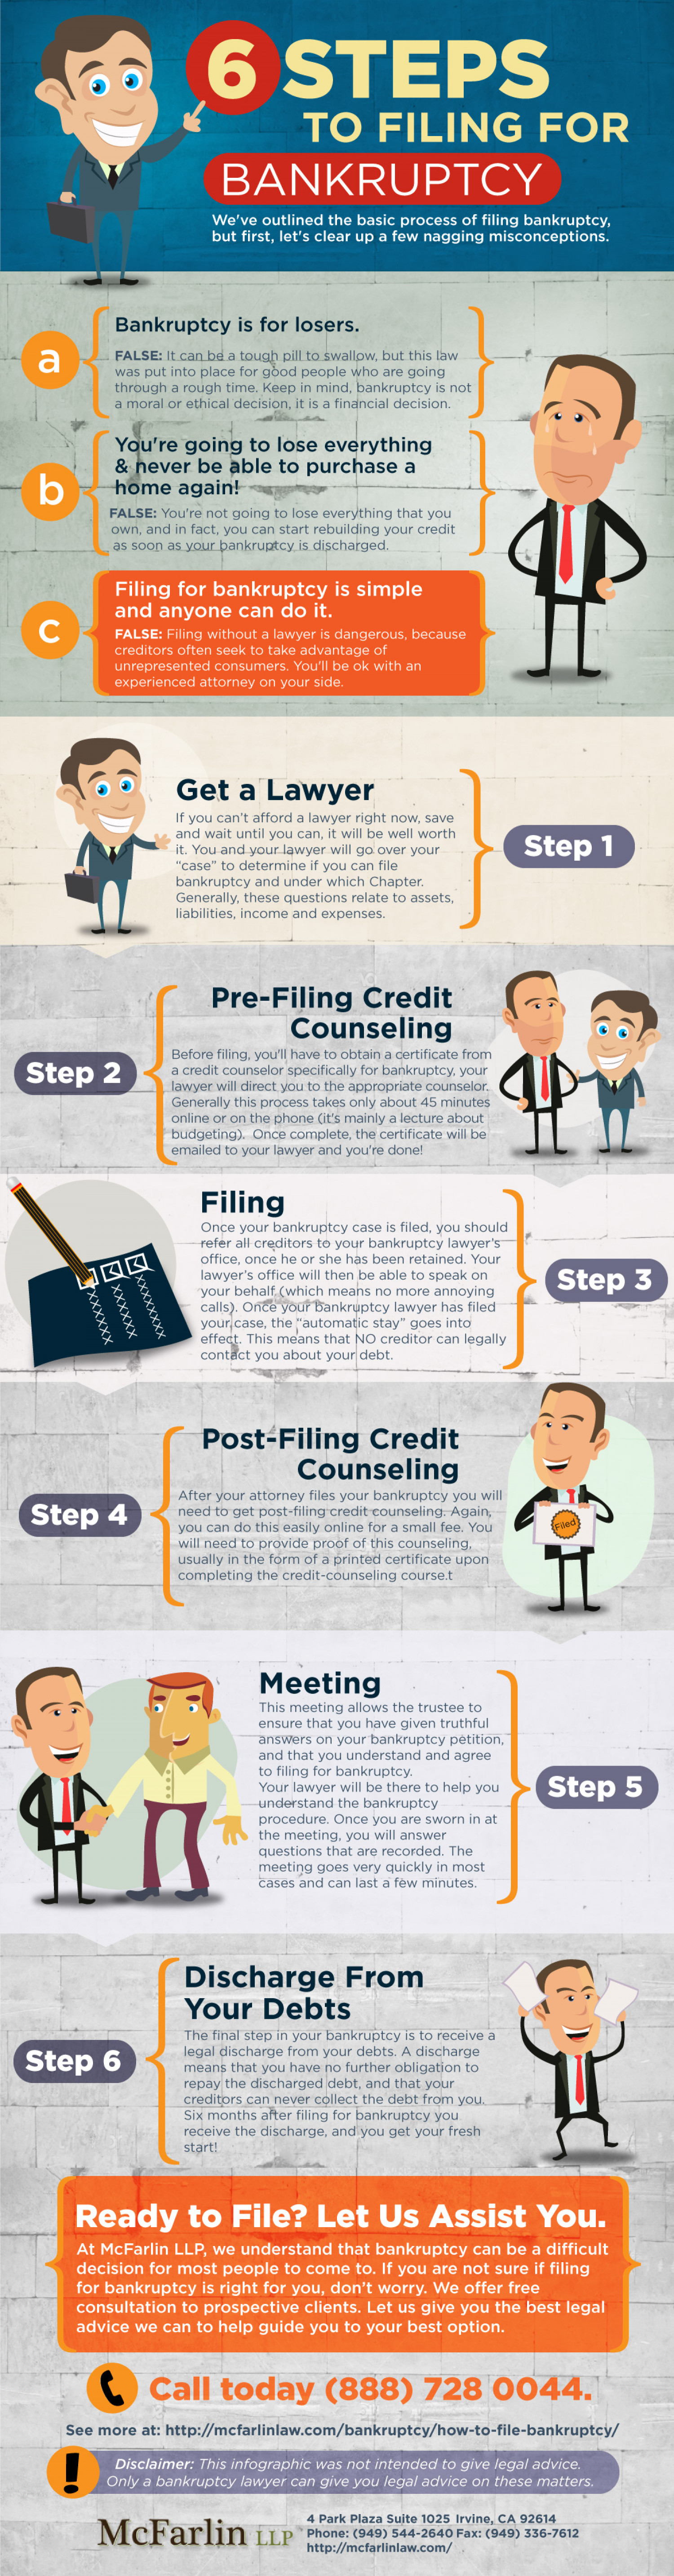 6 Steps to Filing for Bankruptcy Infographic